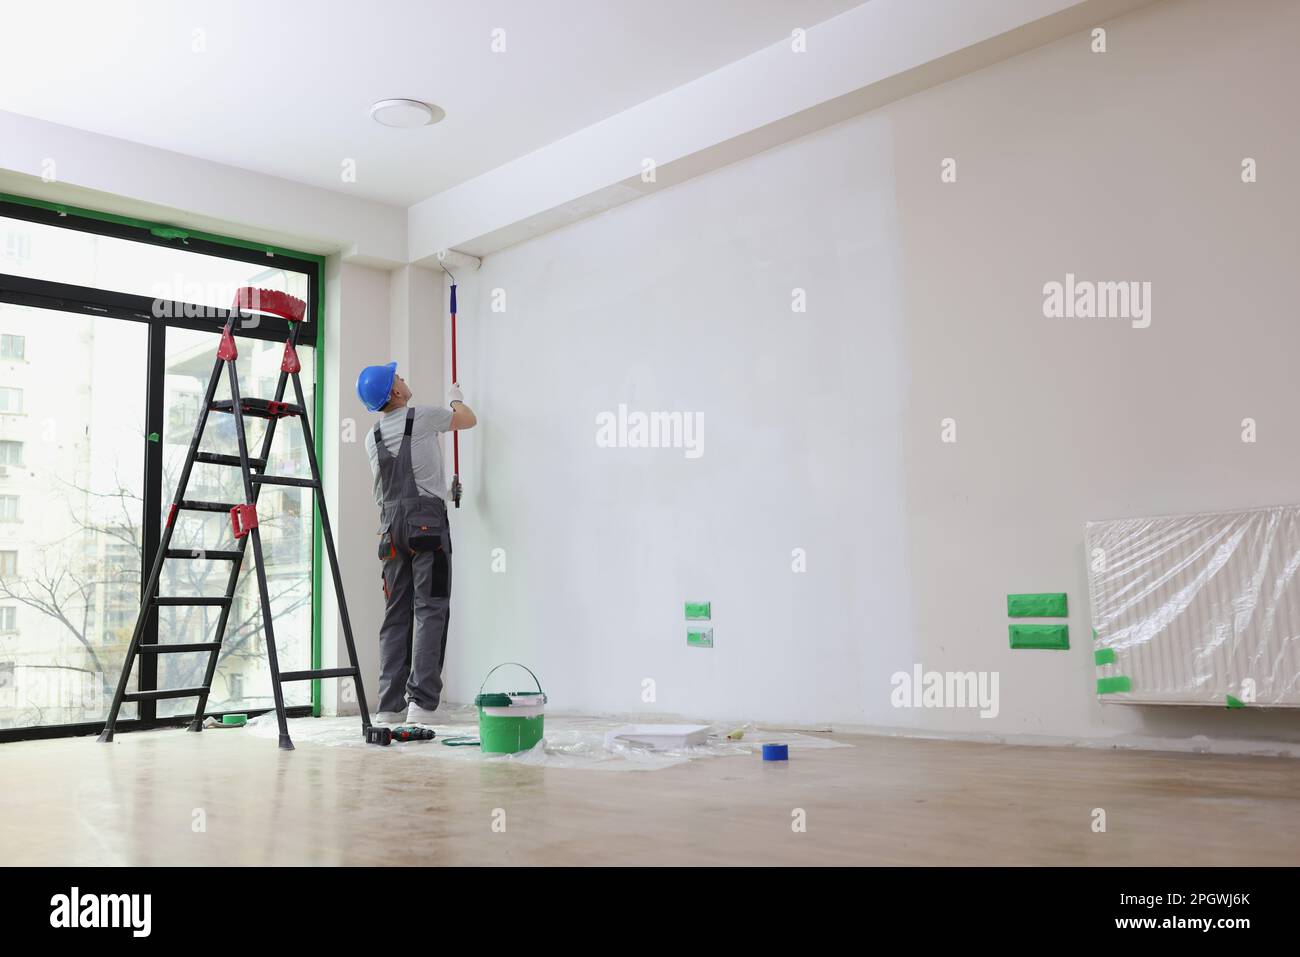 Employee with helmet paints wall with roller in premise Stock Photo